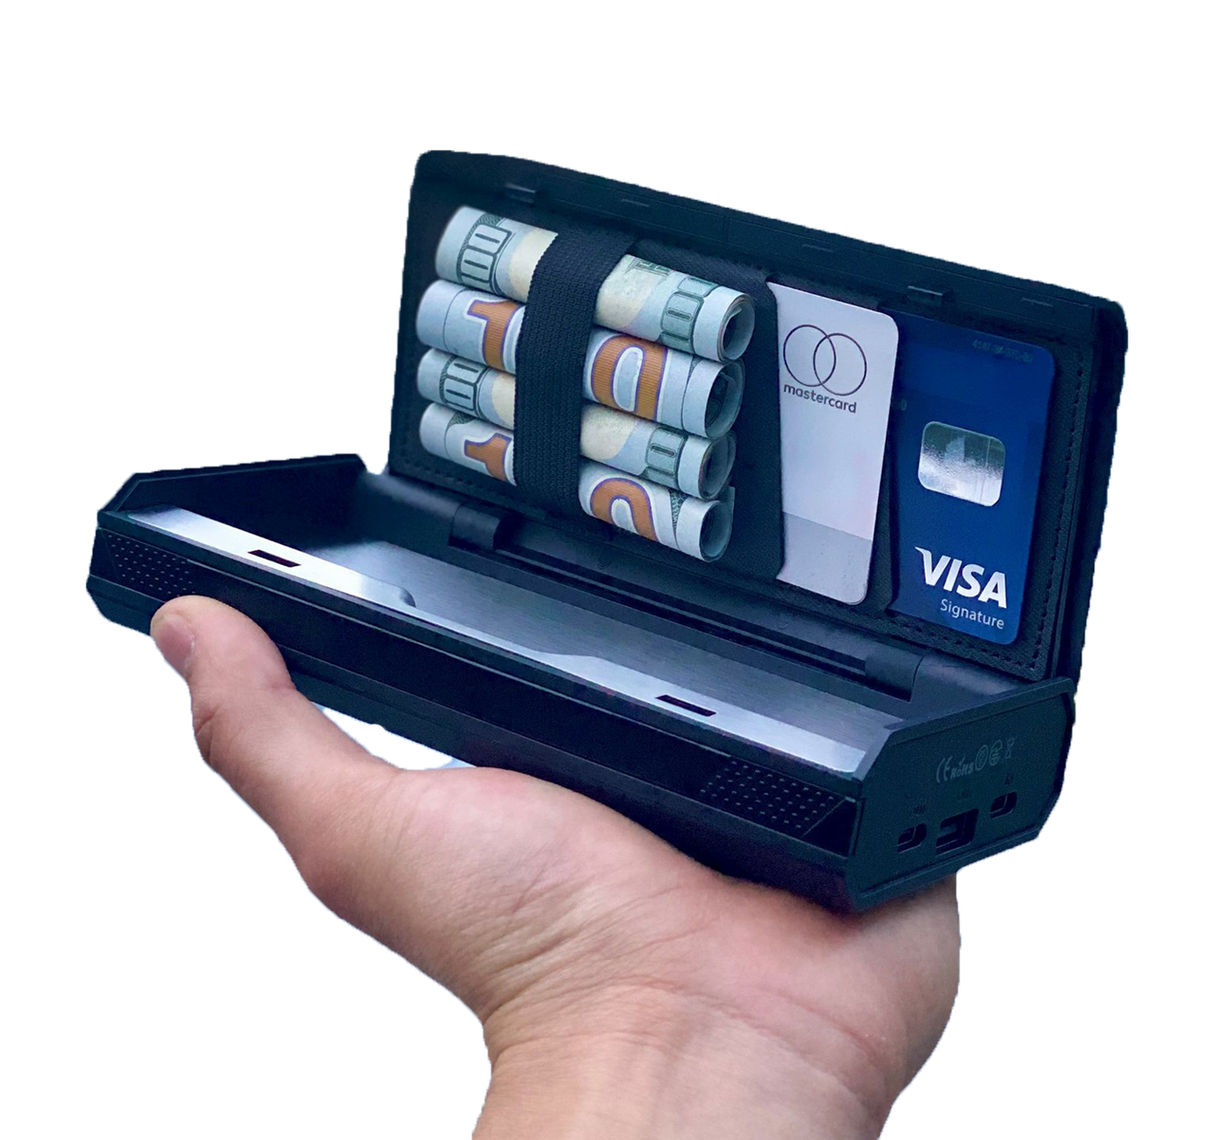 Octave Batt Pack Power Bank & Travel Safe with cash and cards, handheld open view